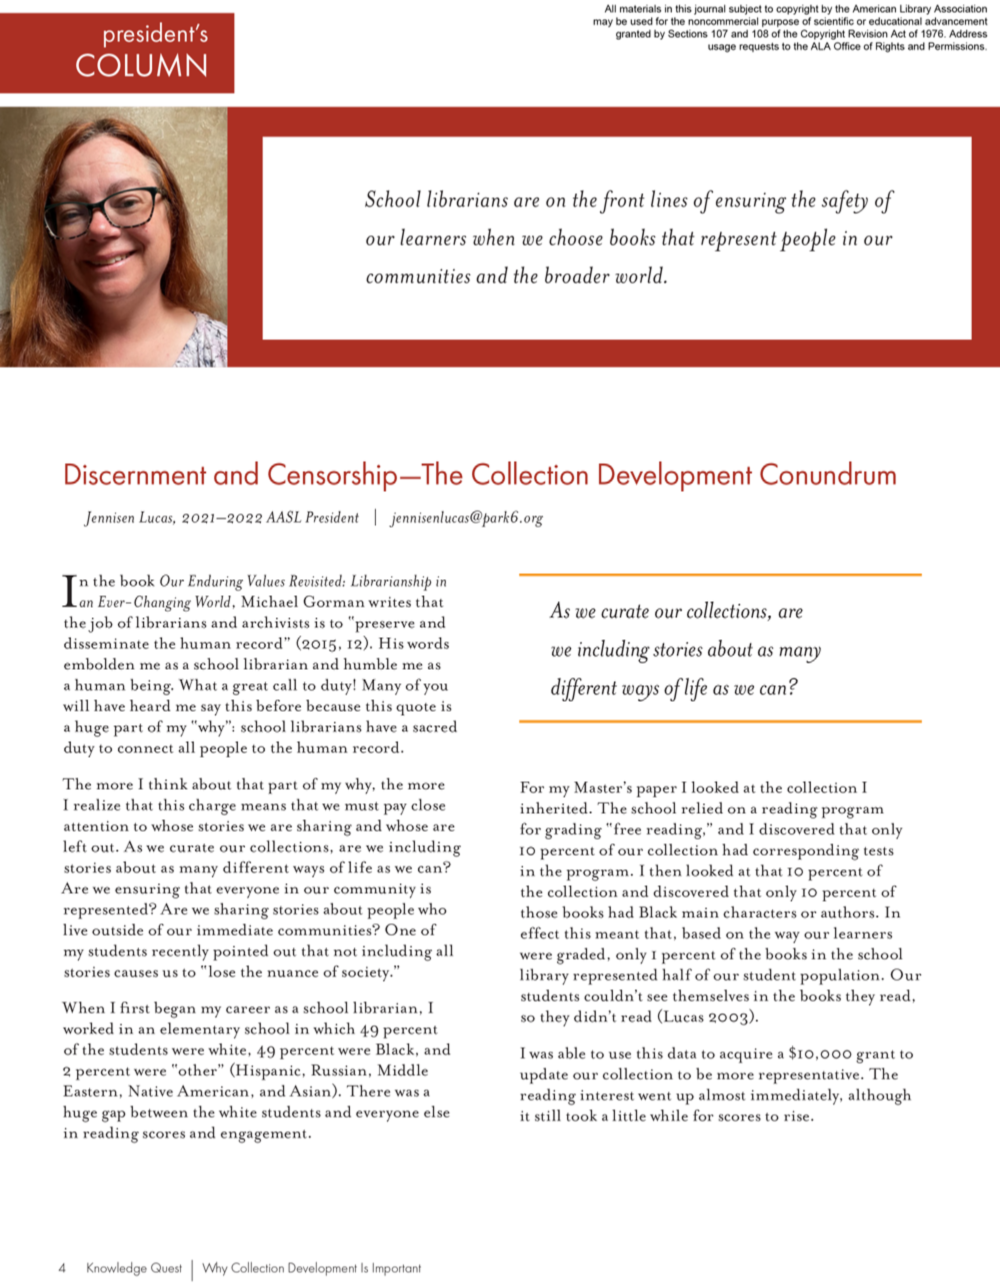 President’s Column: Discernment and Censorship—The Collection Development Conundrum (Volume 50, No.4, pgs 4-5)